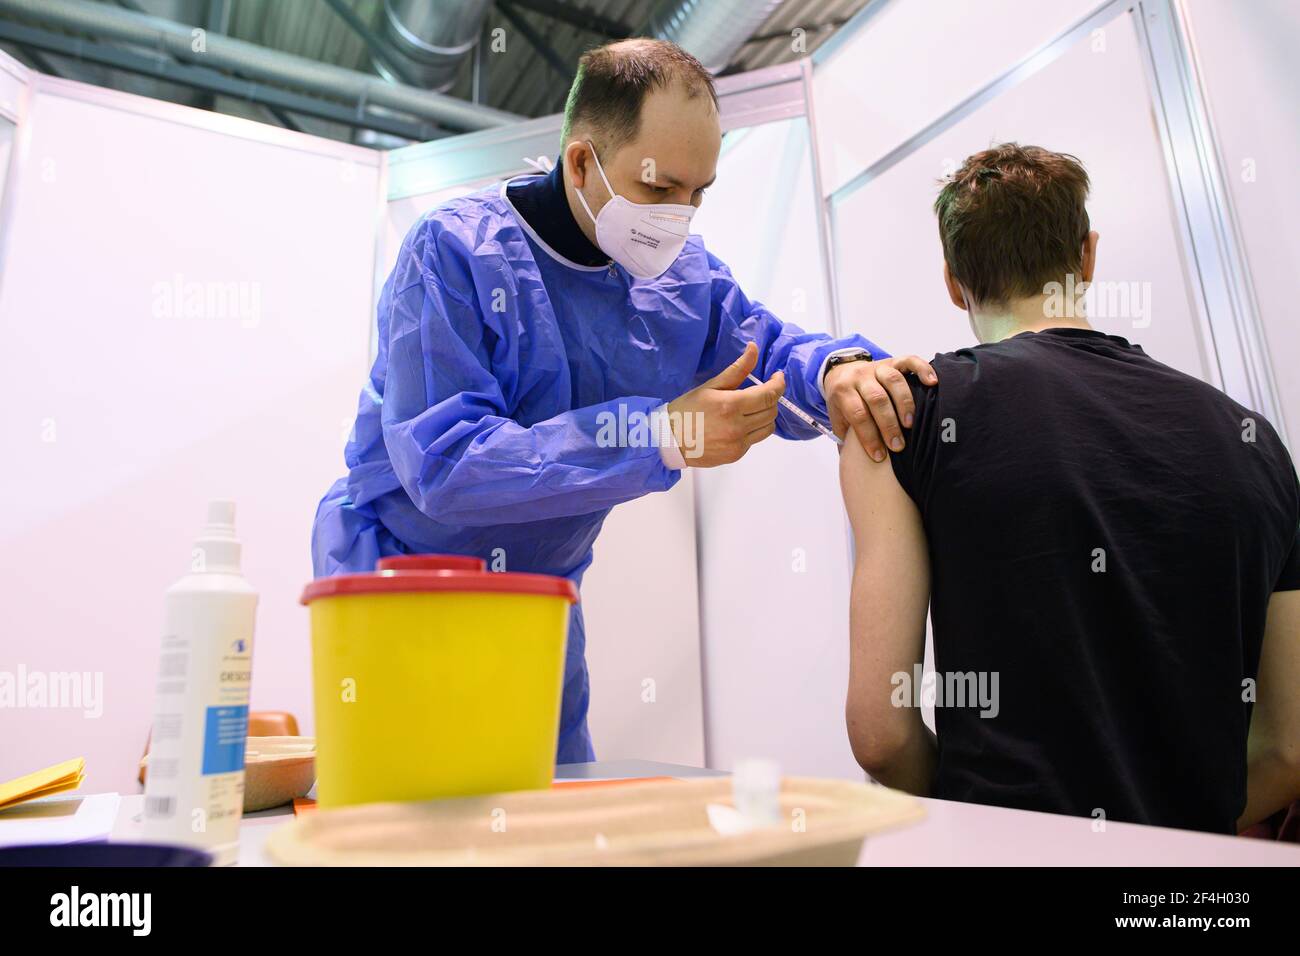 Dresden, Germany. 20th Mar, 2021. A doctor inoculates a man against the coronavirus at a vaccination centre in Dresden, Germany, on Saturday. Germany's hopes of relaxing its lockdown restrictions in time for Easter holidays at the start of April are dwindling amid a renewed surge in infection rates on Sunday. Credit: Robert Michael/dpa-Zentralbild/dpa/Alamy Live News Stock Photo